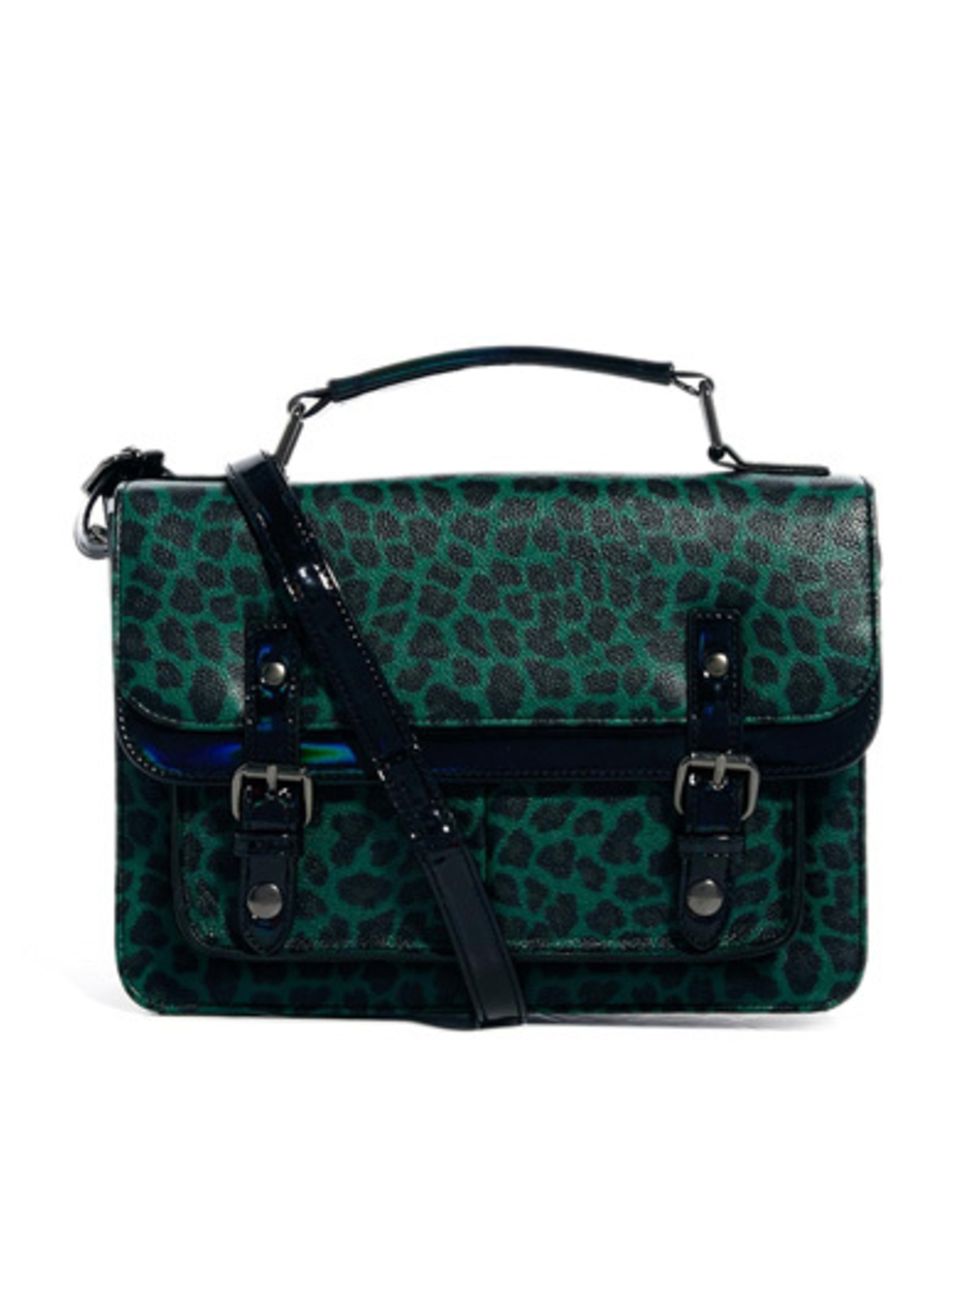 Product, Bag, Style, Teal, Turquoise, Luggage and bags, Black, Shoulder bag, Beige, Aqua, 